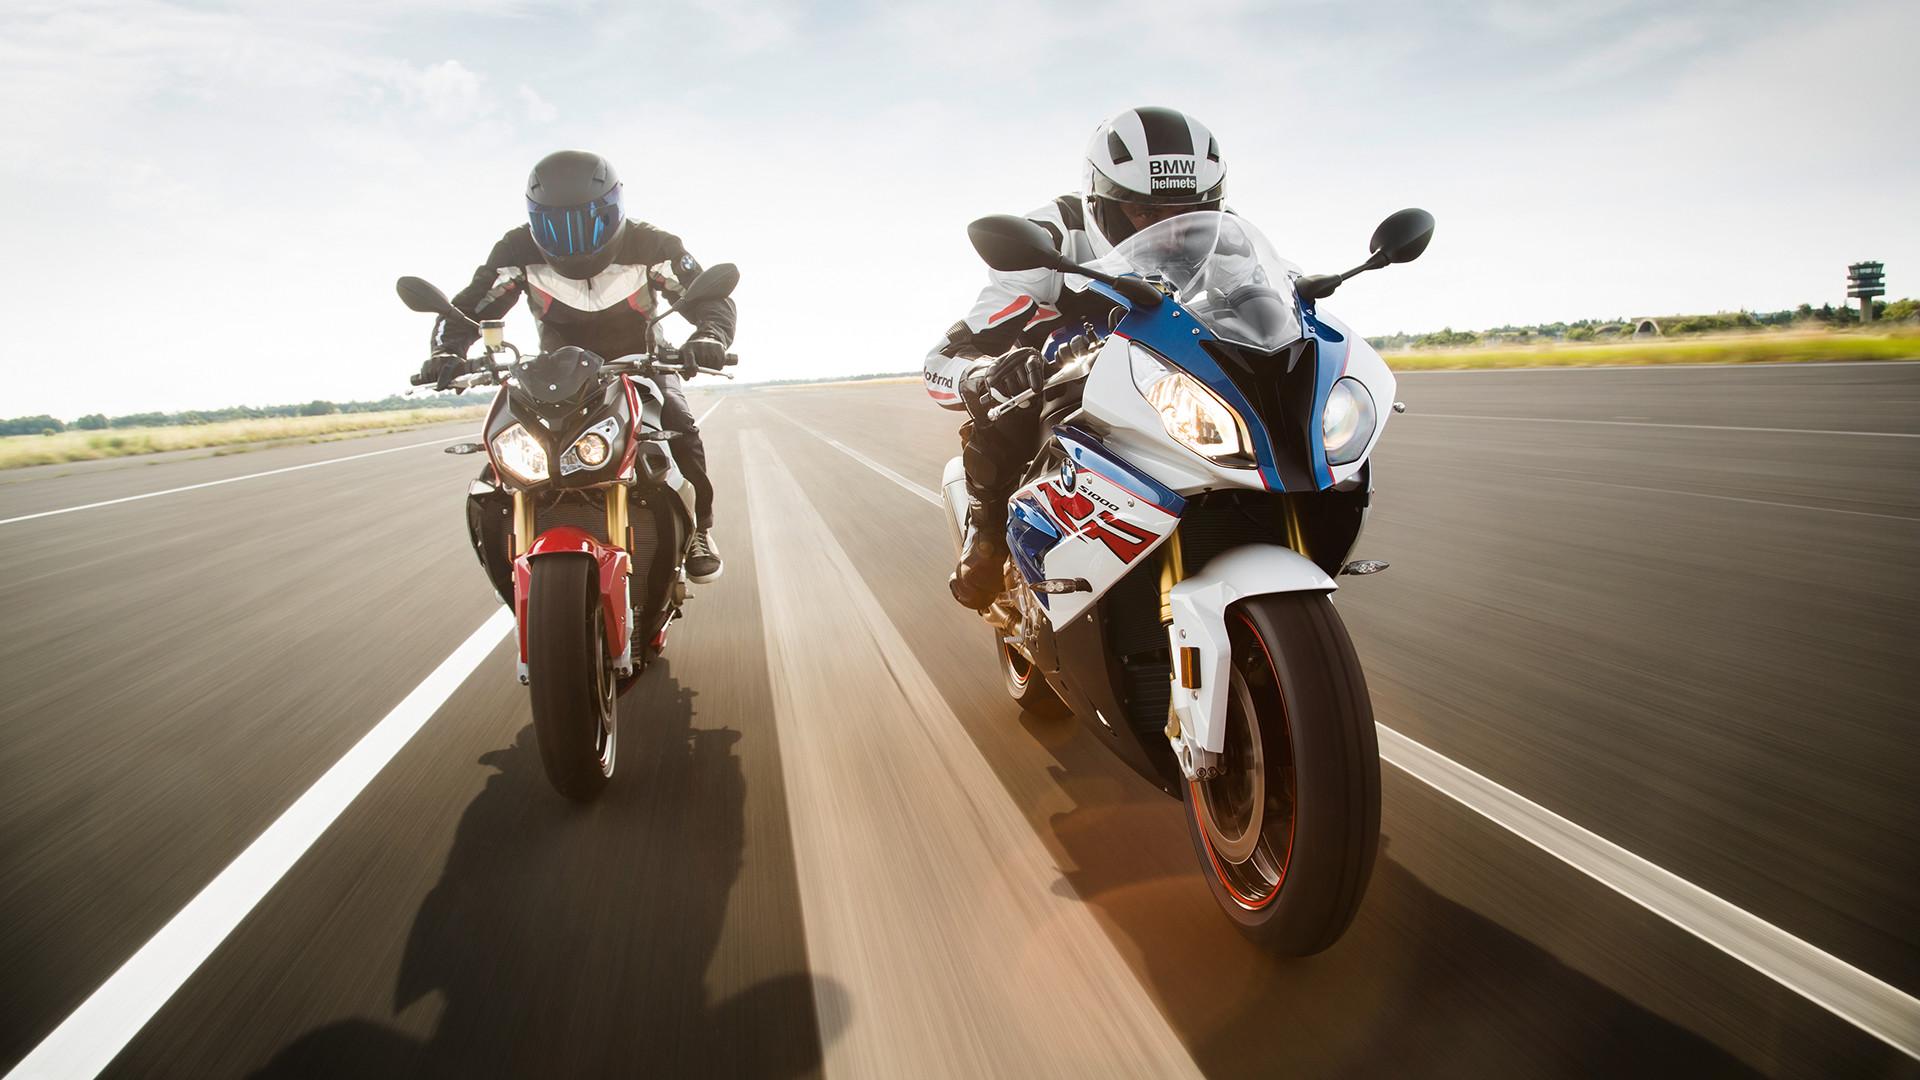 S1000RR BMW Superbike Gets A 2019 Update Is Confirmed